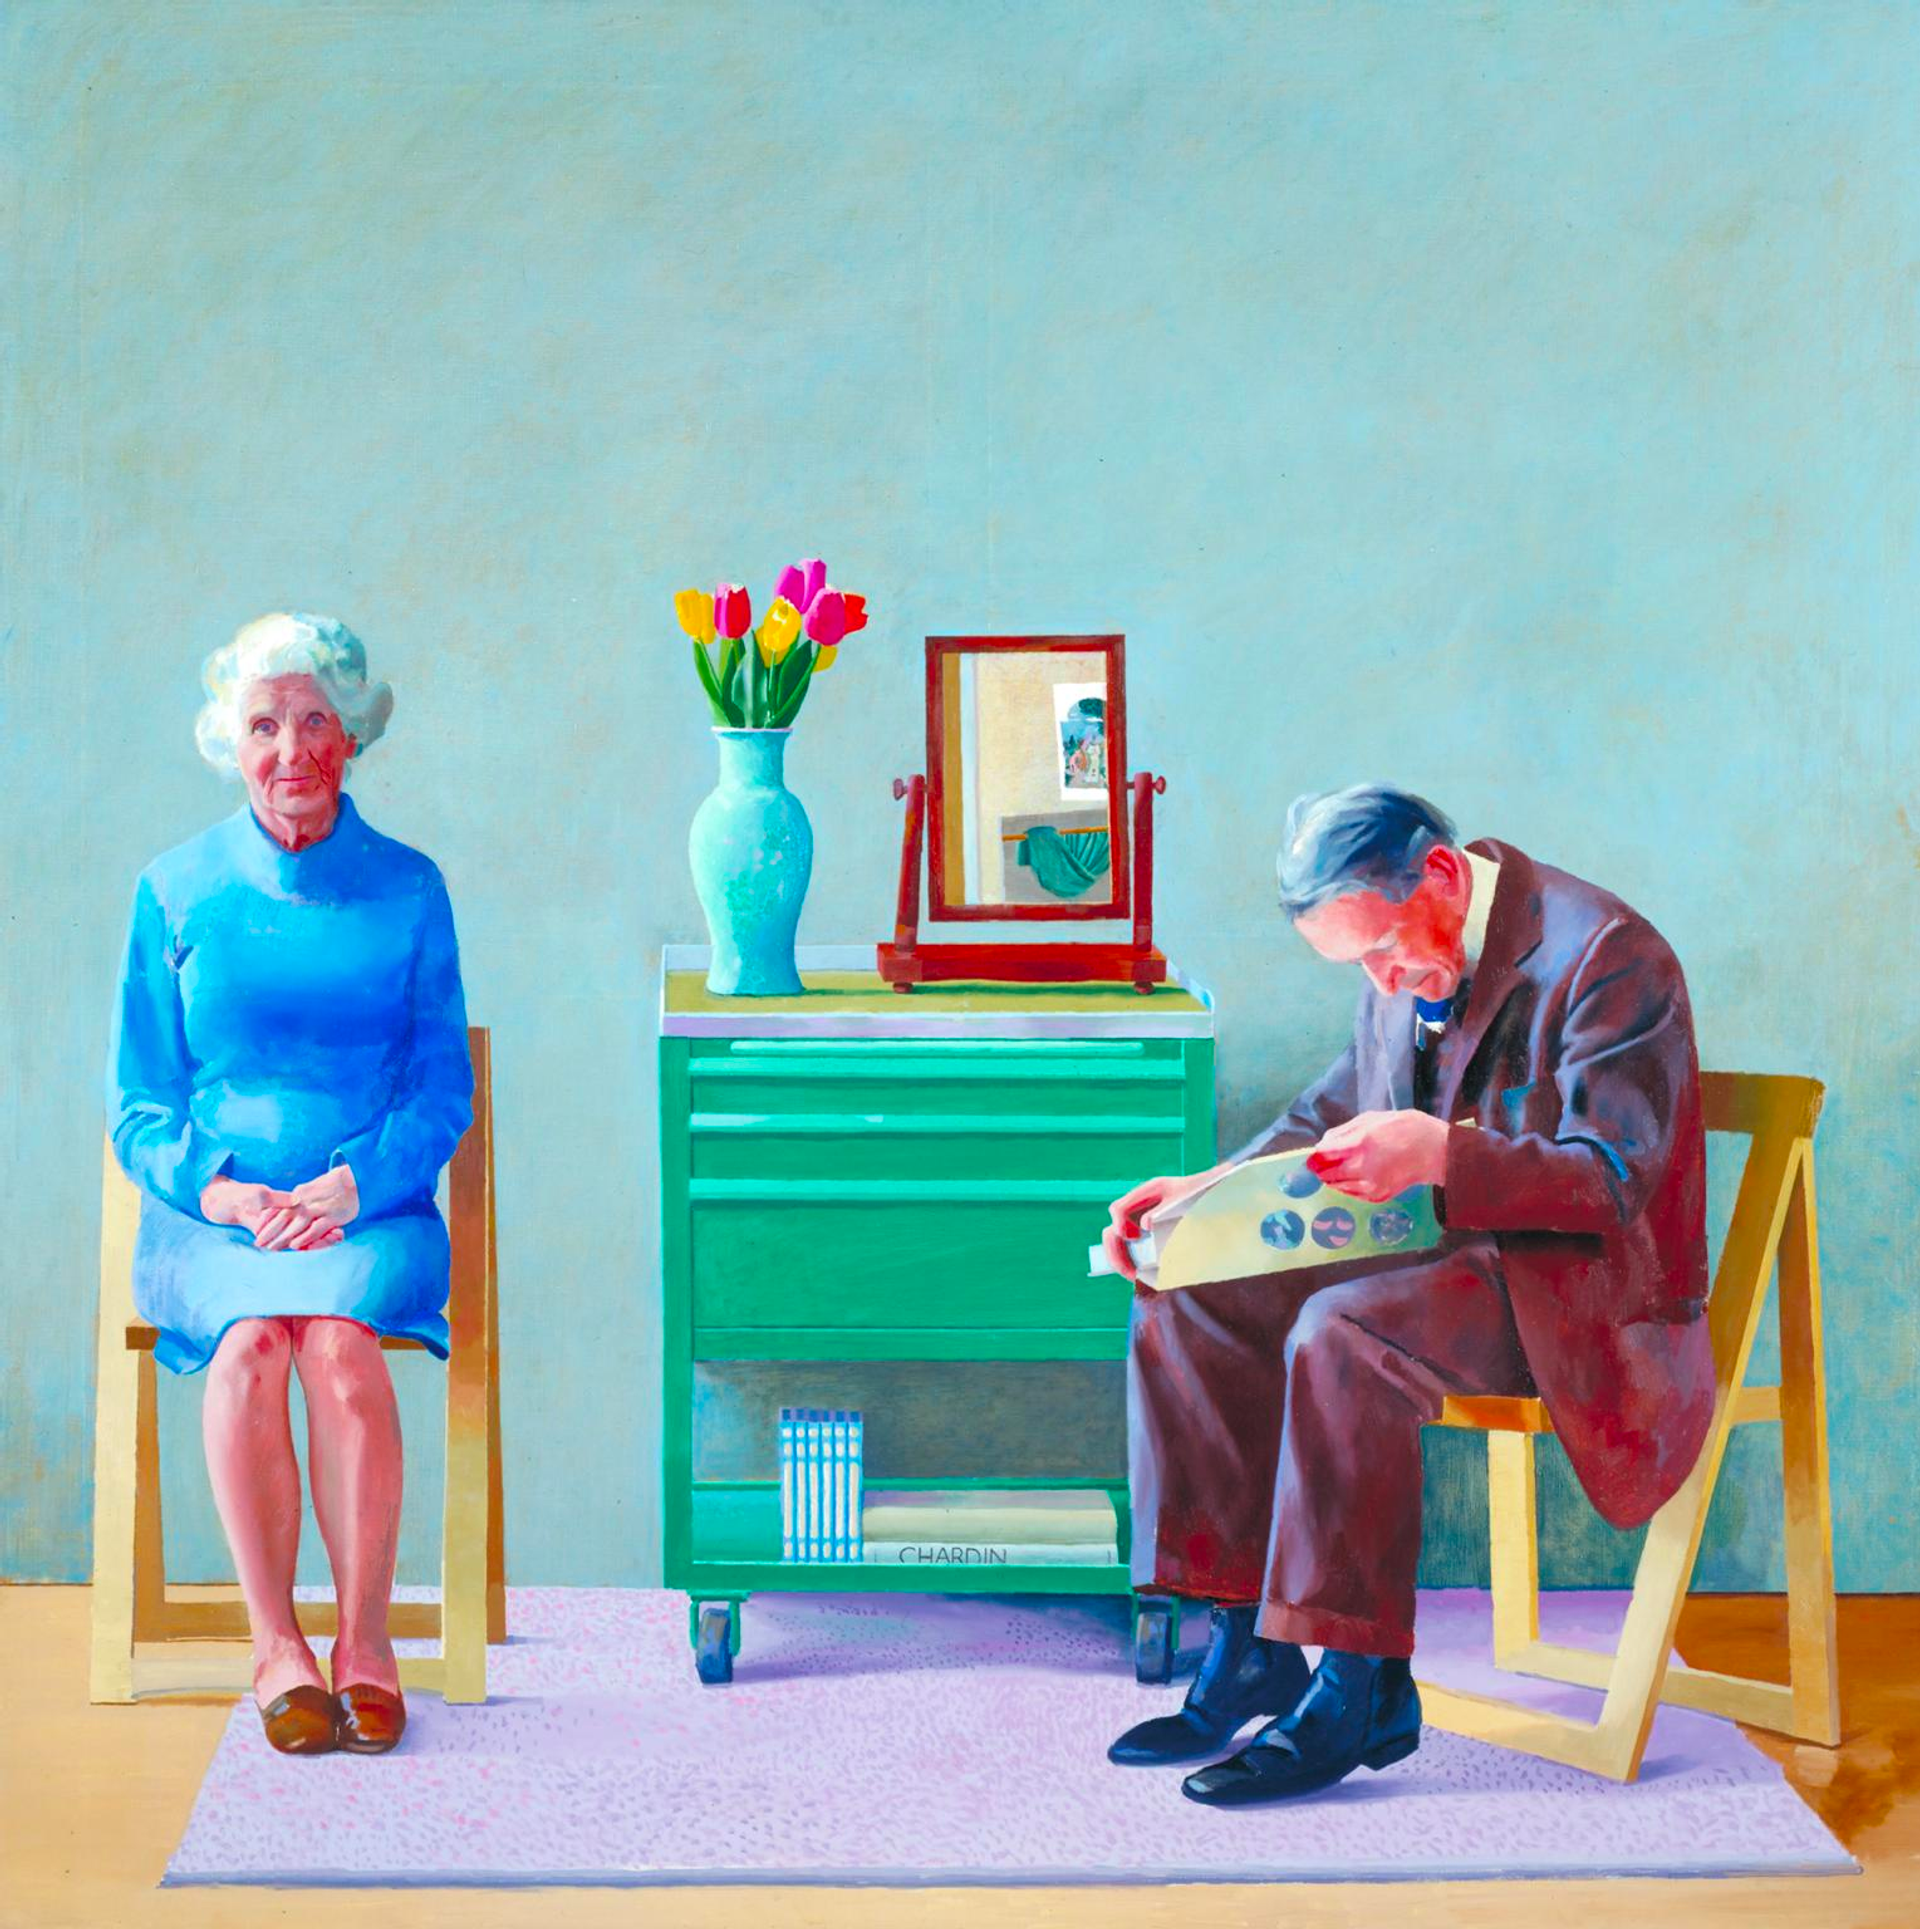 A woman in a blue dress sits facing the painter; a man in a brown suit suits adjacent to her, reading a book. A green furniture unit is inbetween the subjects, flowers in a vase and a mirror sit on top of it.